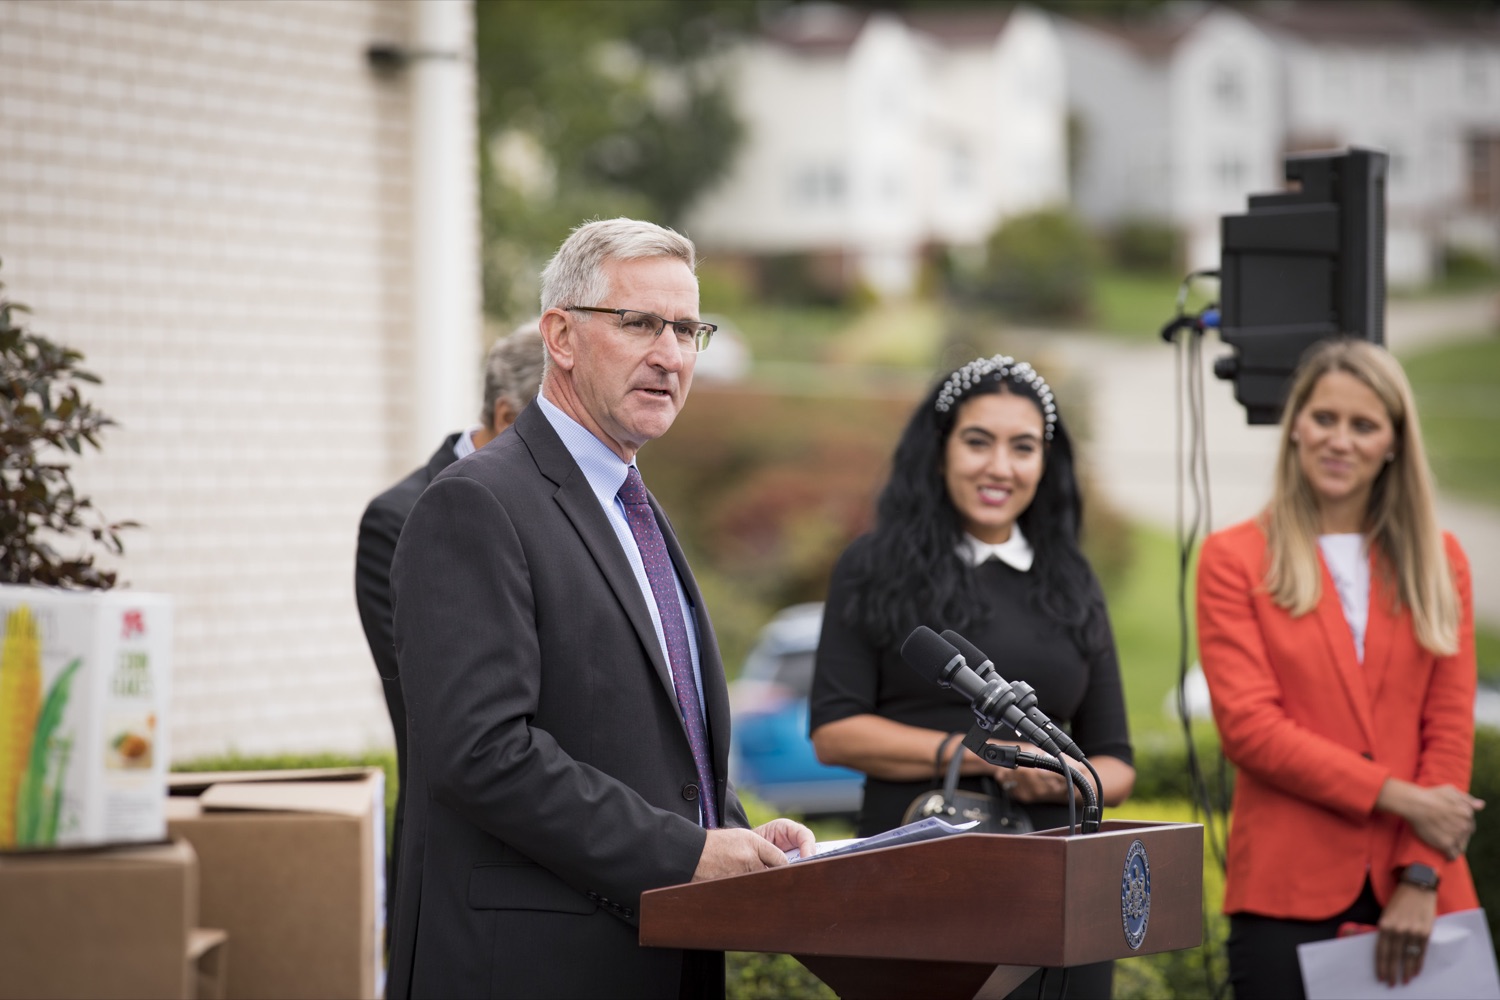 Department of Agriculture Secretary Russell Redding announces partnership with DoorDash to deliver meals to seniors in need, in Delmont, PA on September 23, 2021.<br><a href="https://filesource.amperwave.net/commonwealthofpa/photo/19091_ag_doordash_cz_01.jpg" target="_blank">⇣ Download Photo</a>